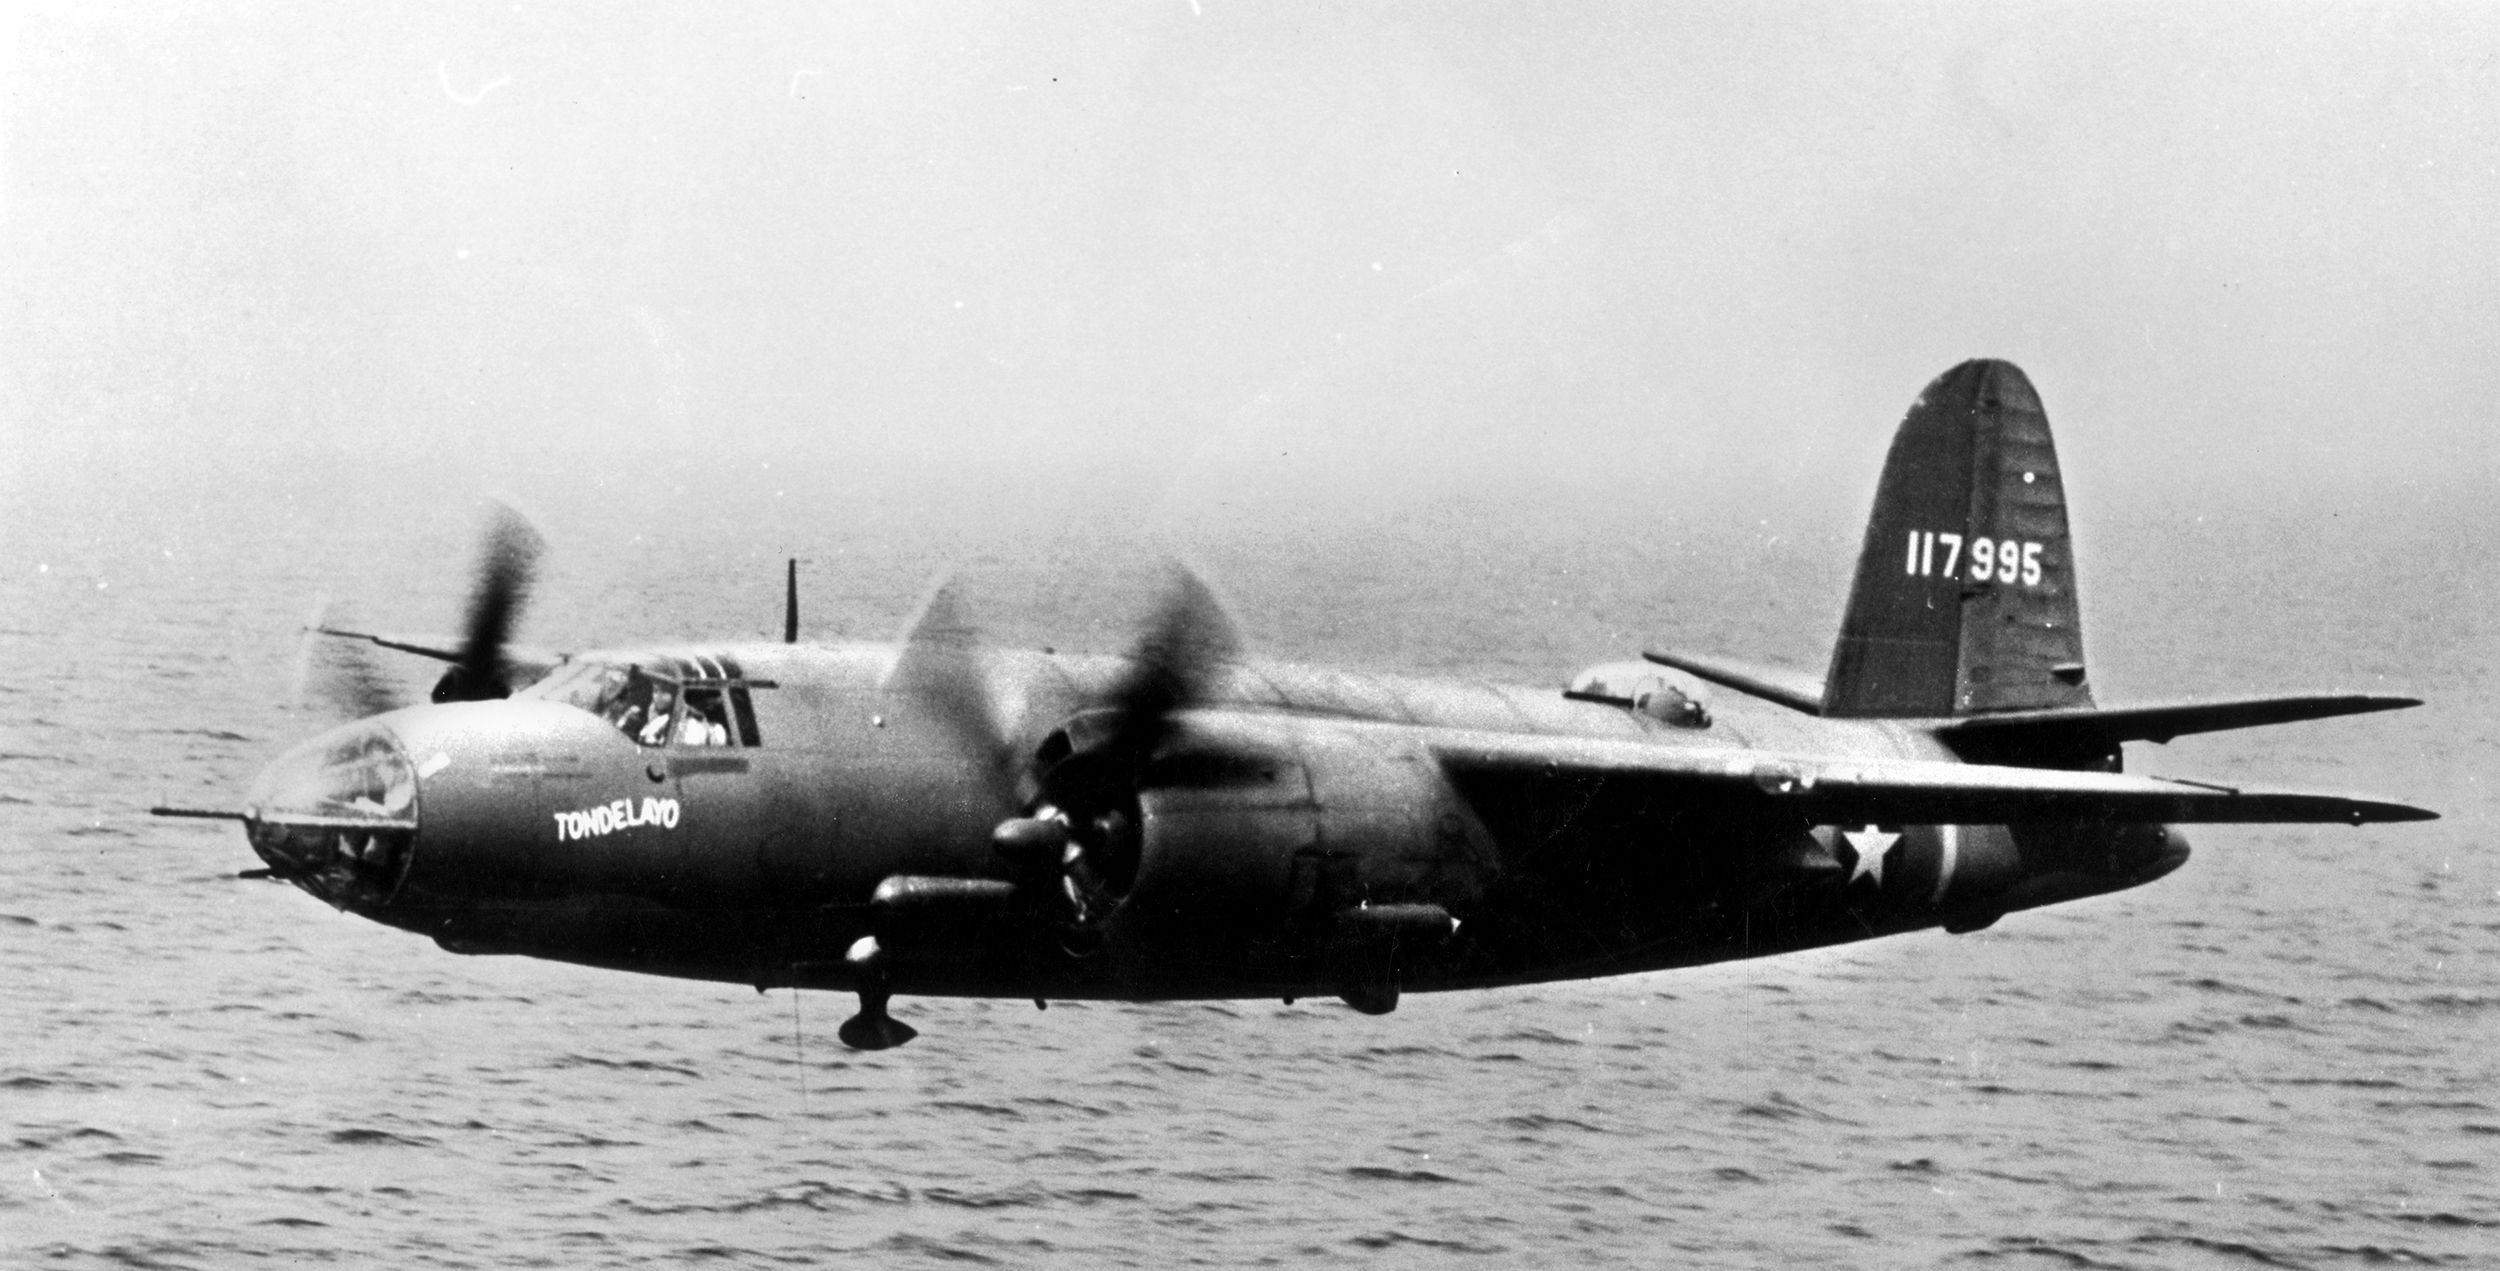 B-26 “Tondelayo” flies low over the English Channel before the first raid on IJmuiden, May 14, 1943. Lt. Col. Stillman piloted this aircraft with the 322nd Bombardment Group during the first raid.